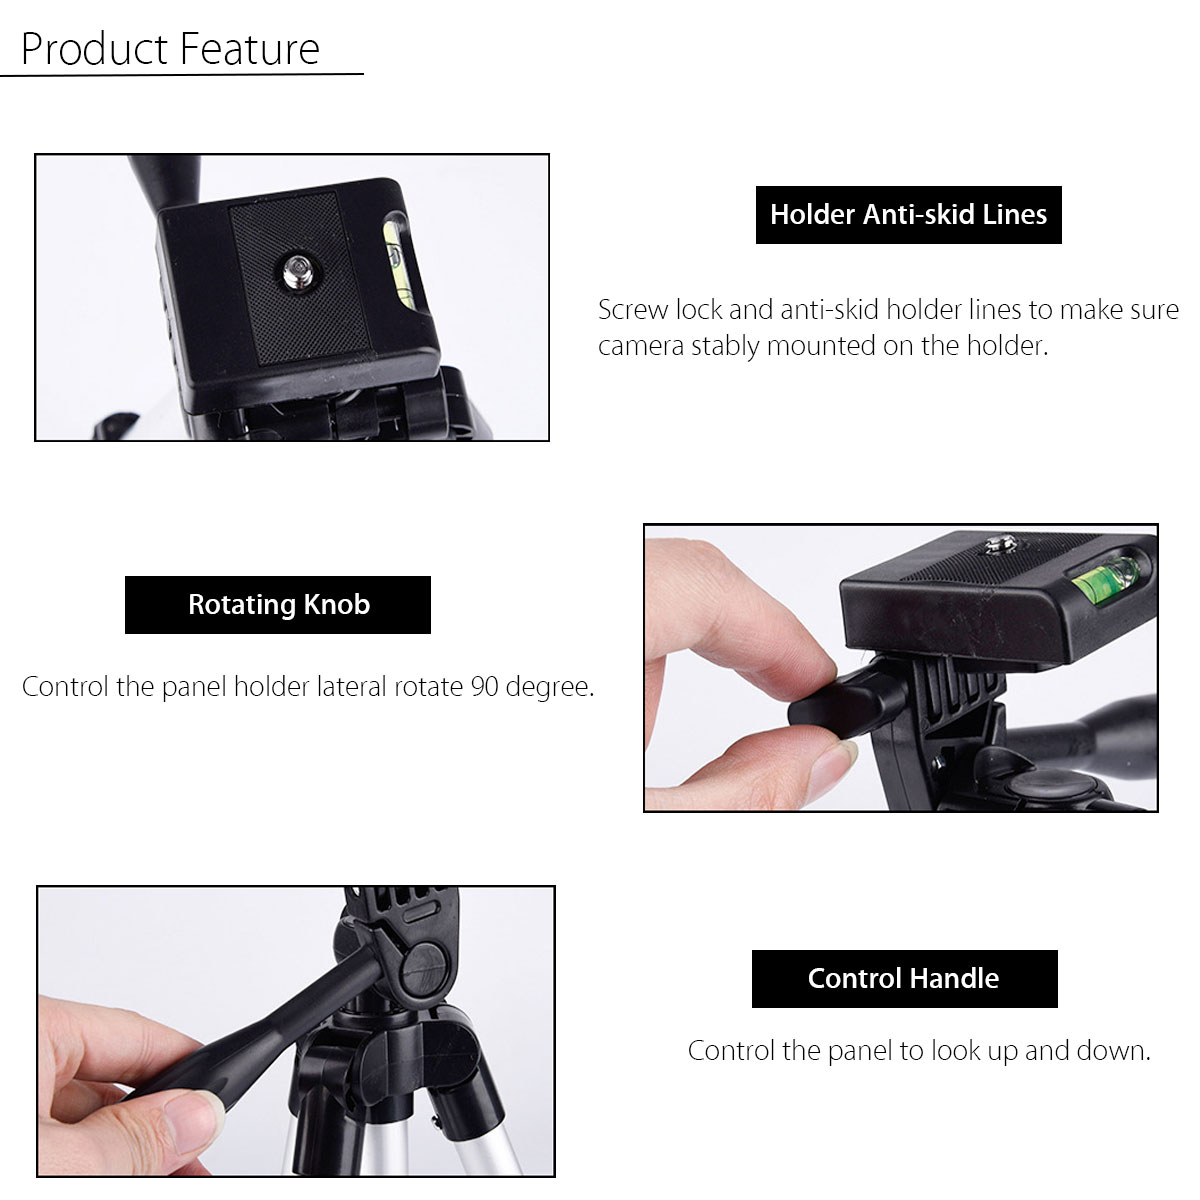 Bakeey-Professional-Camera-Adjustable-Tripod-Stand-Holder-Live-Selfie-Stick-for-iPhone-8-Plus-X-S8-S-1134052-2